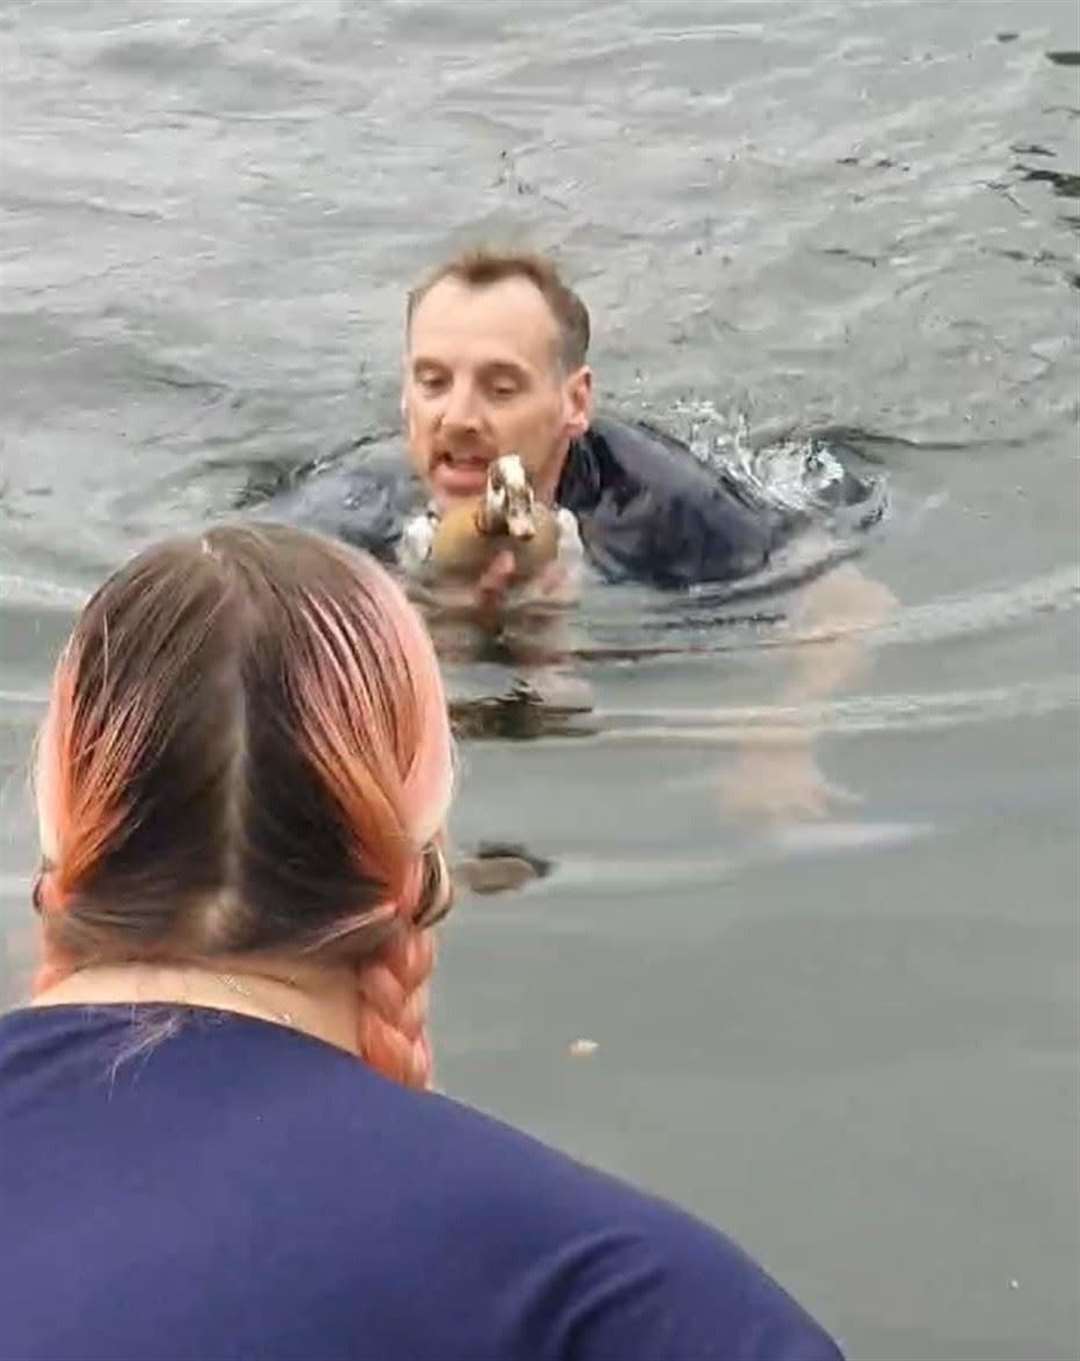 Swan rescuer Danni Rogers jumped into Brooklands Lake to rescue the goose. Photo credit: Dartford Animal Rescue